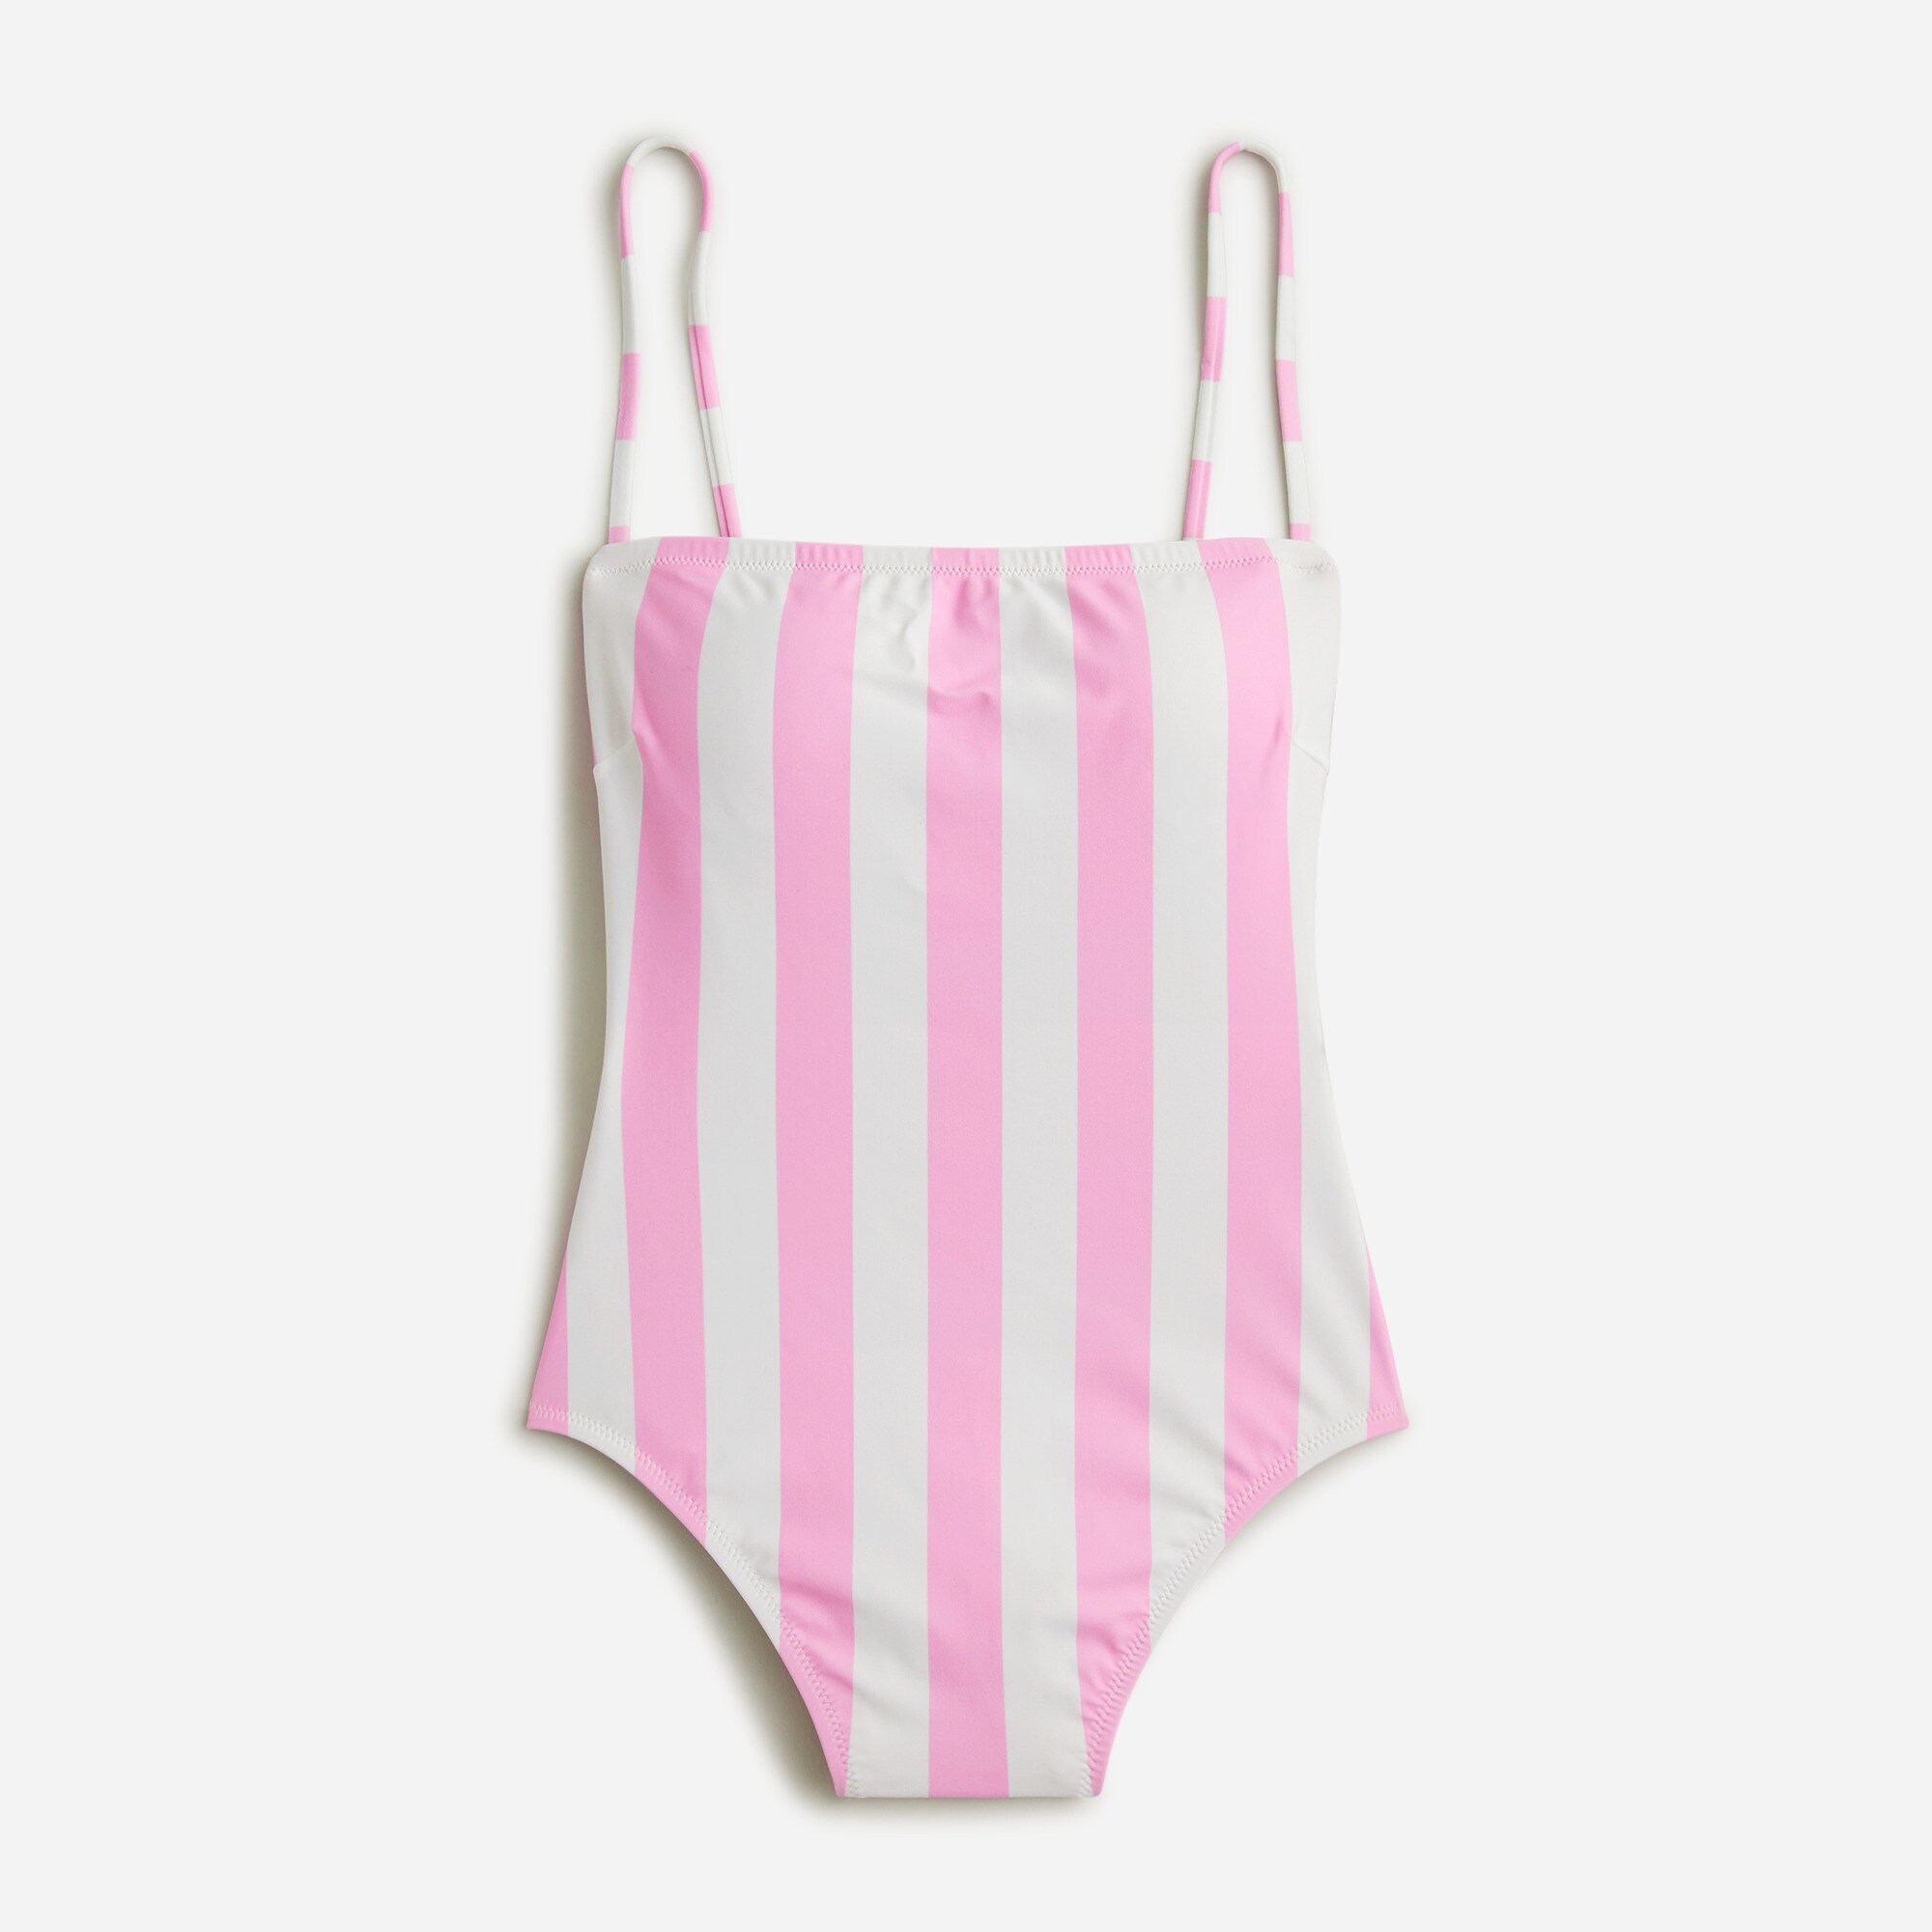  Squareneck one-piece swimsuit in pink stripe